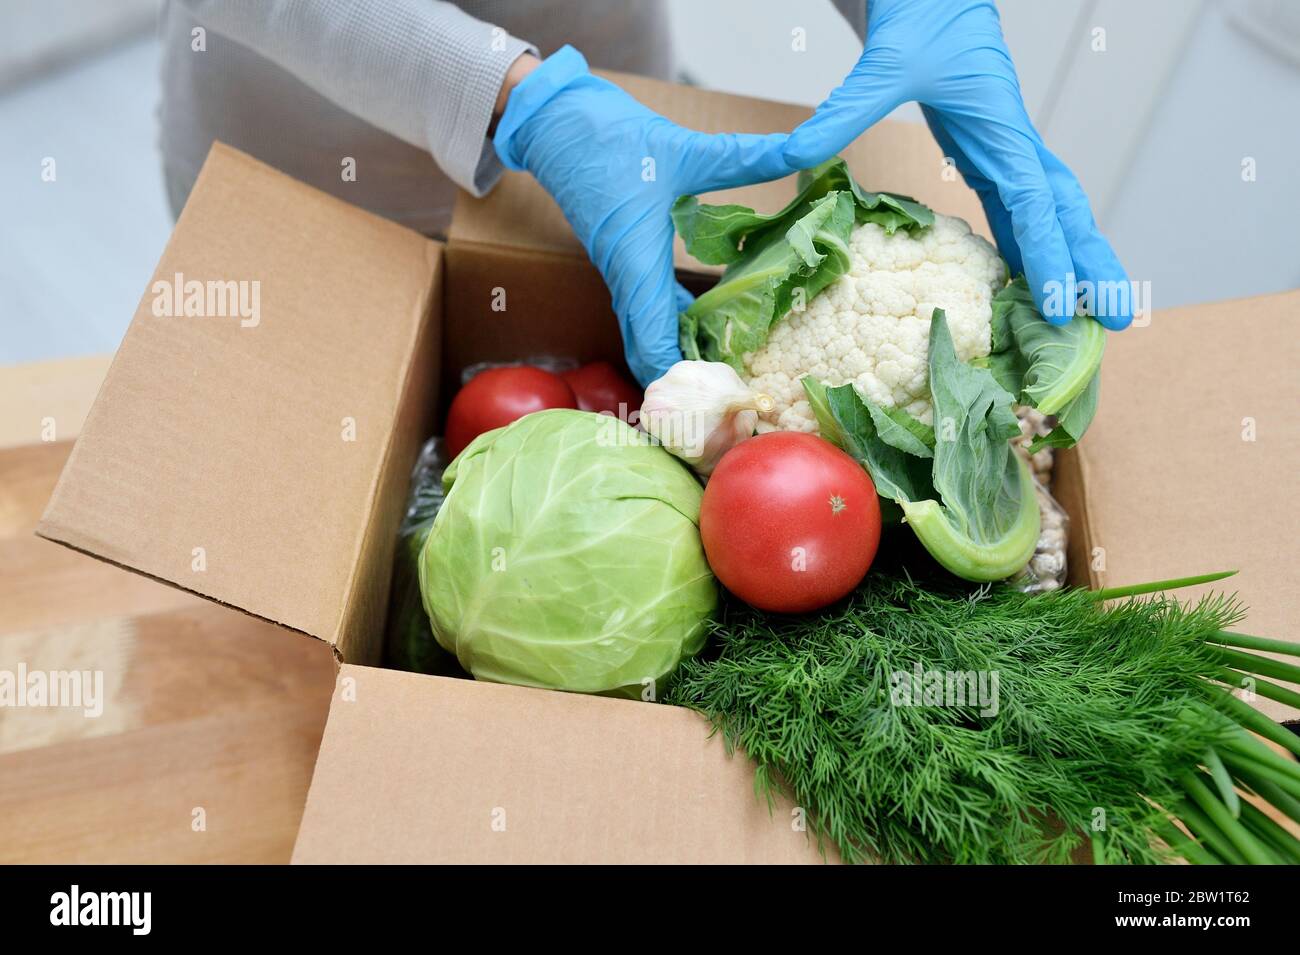 Volunteer in gloves with food donation box puts vegetables to help others. donation box with foodstuffs Stock Photo